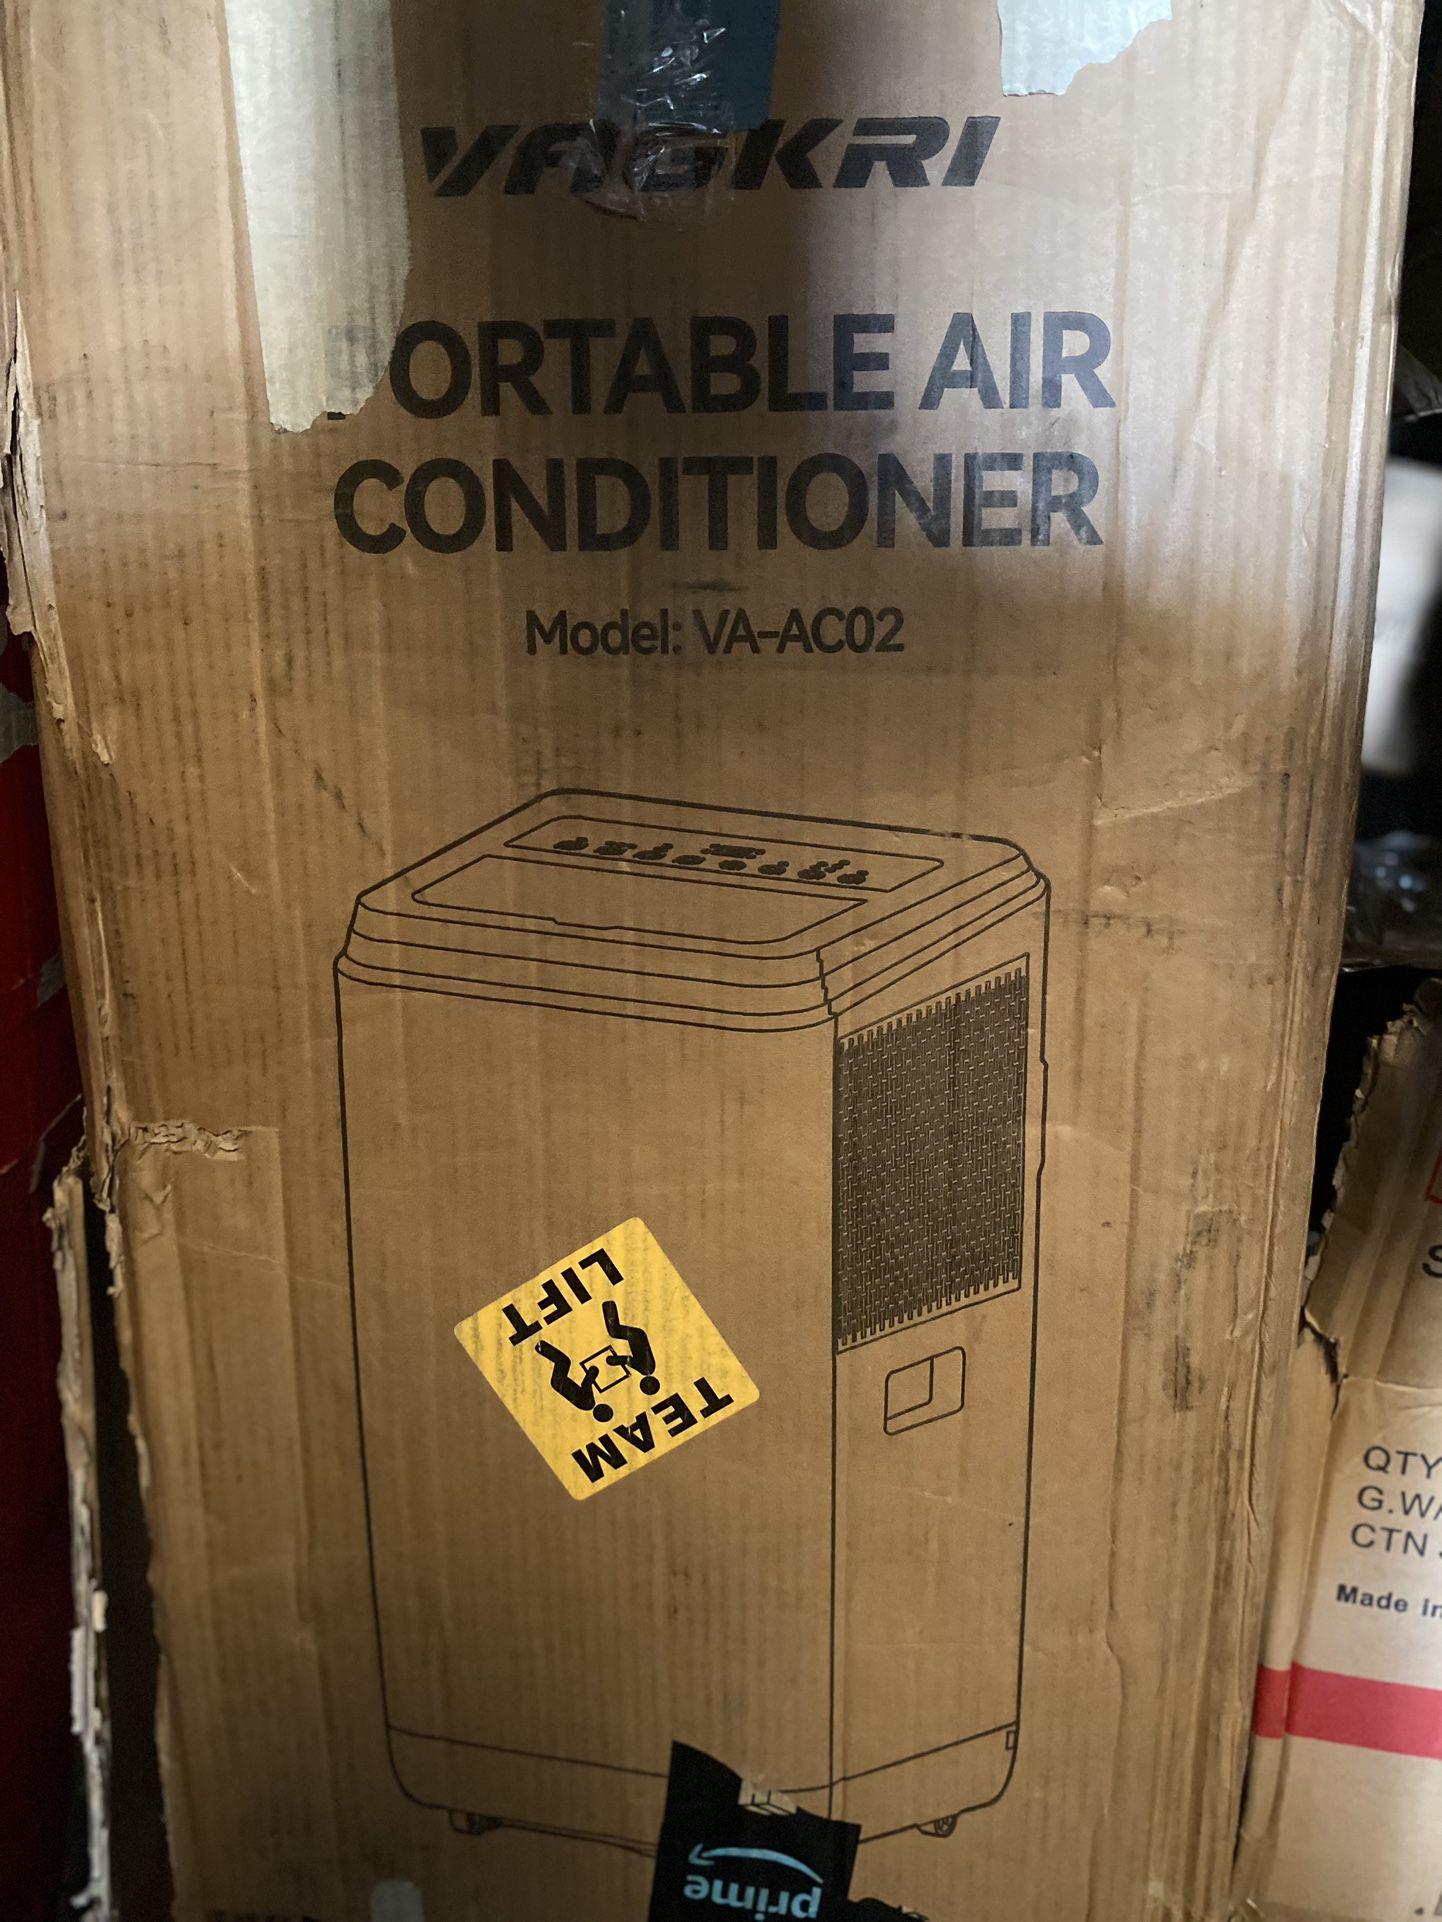 VAGKRI Portable Air Conditioners 12000 BTU, 3-in-1 AC Unit with Fan & Dehumidifier Cools up to 400 sq. ft, Portable AC with ECO Mode, 3 Fan Speeds, Au